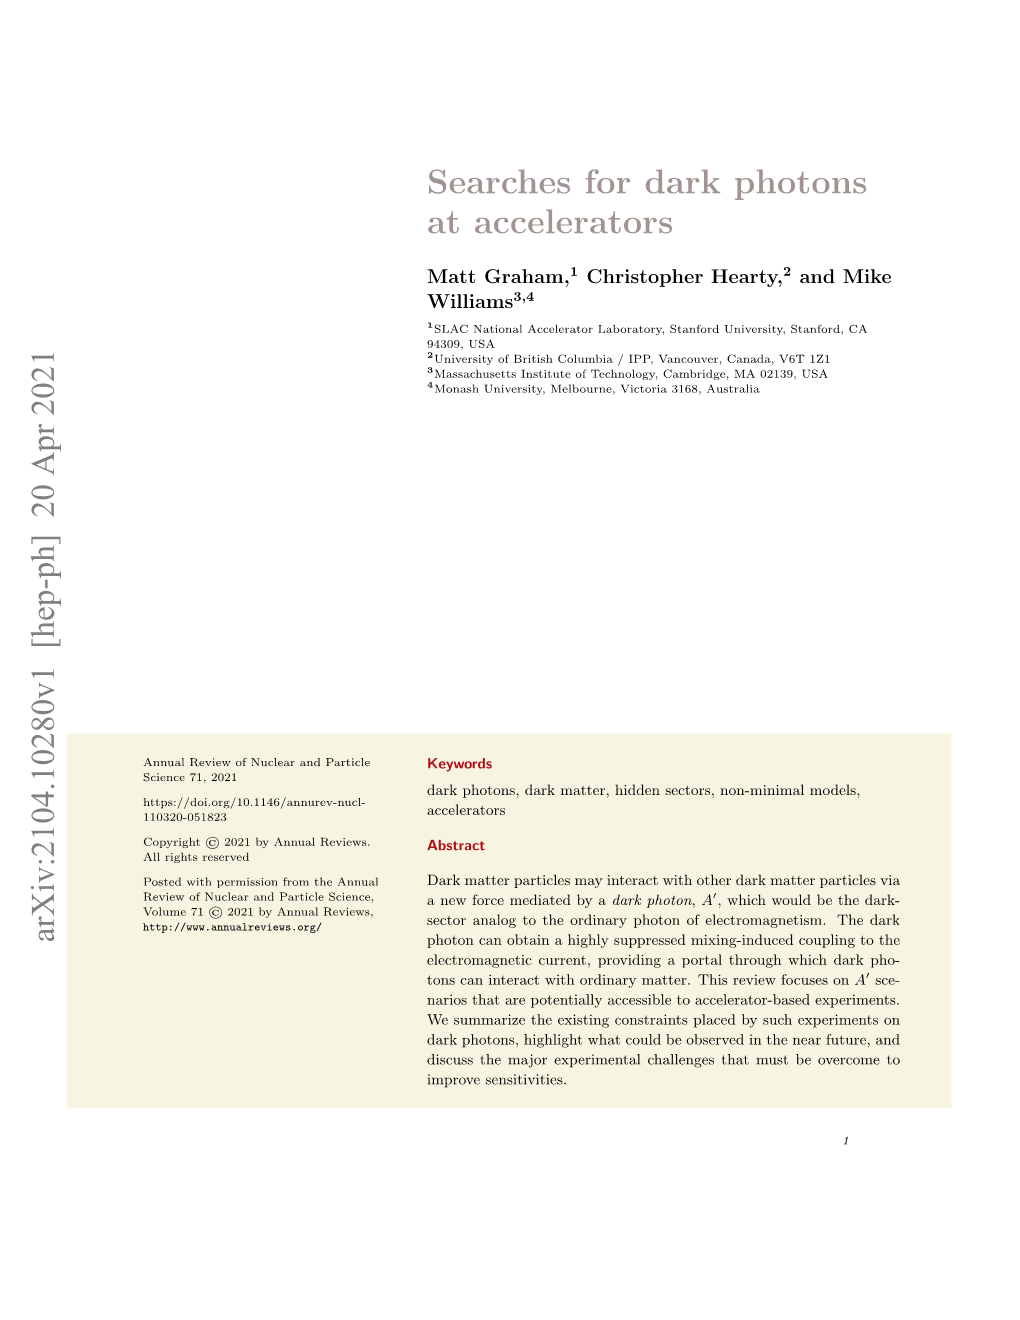 Searches for Dark Photons at Accelerators Arxiv:2104.10280V1